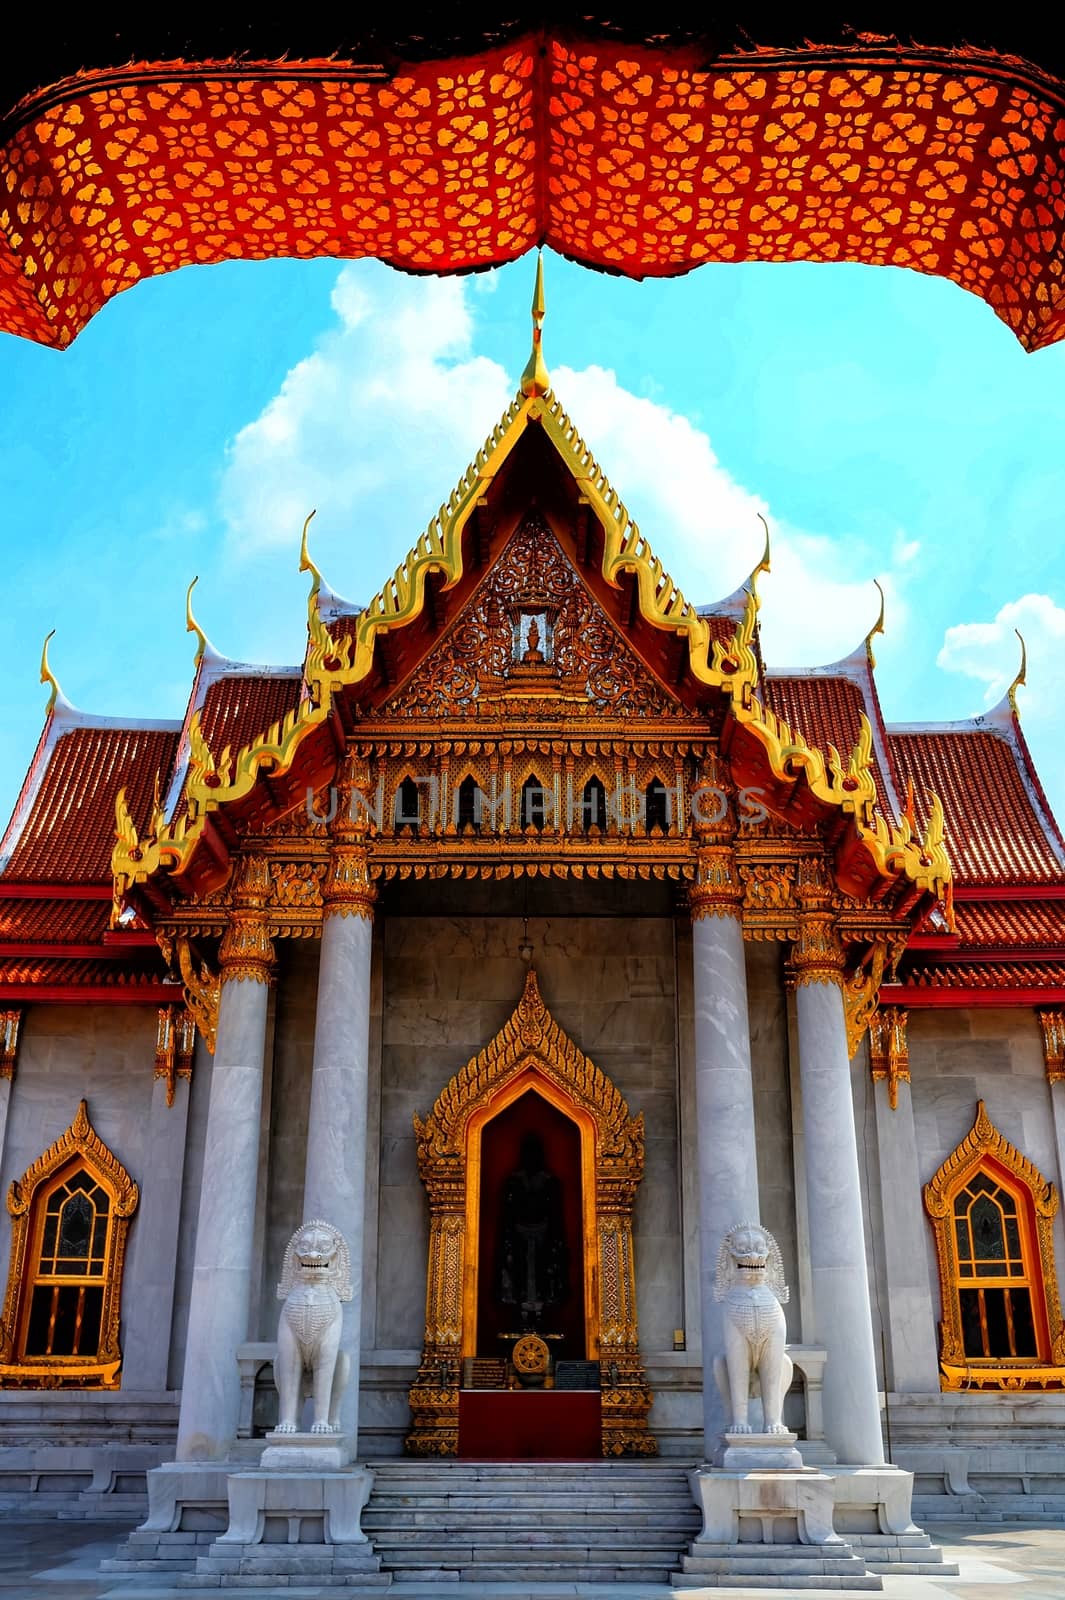 Ancient Marble Church at Wat Benchamabophit Temple. It is a famous landmark in Bangkok Thailand. by mesamong